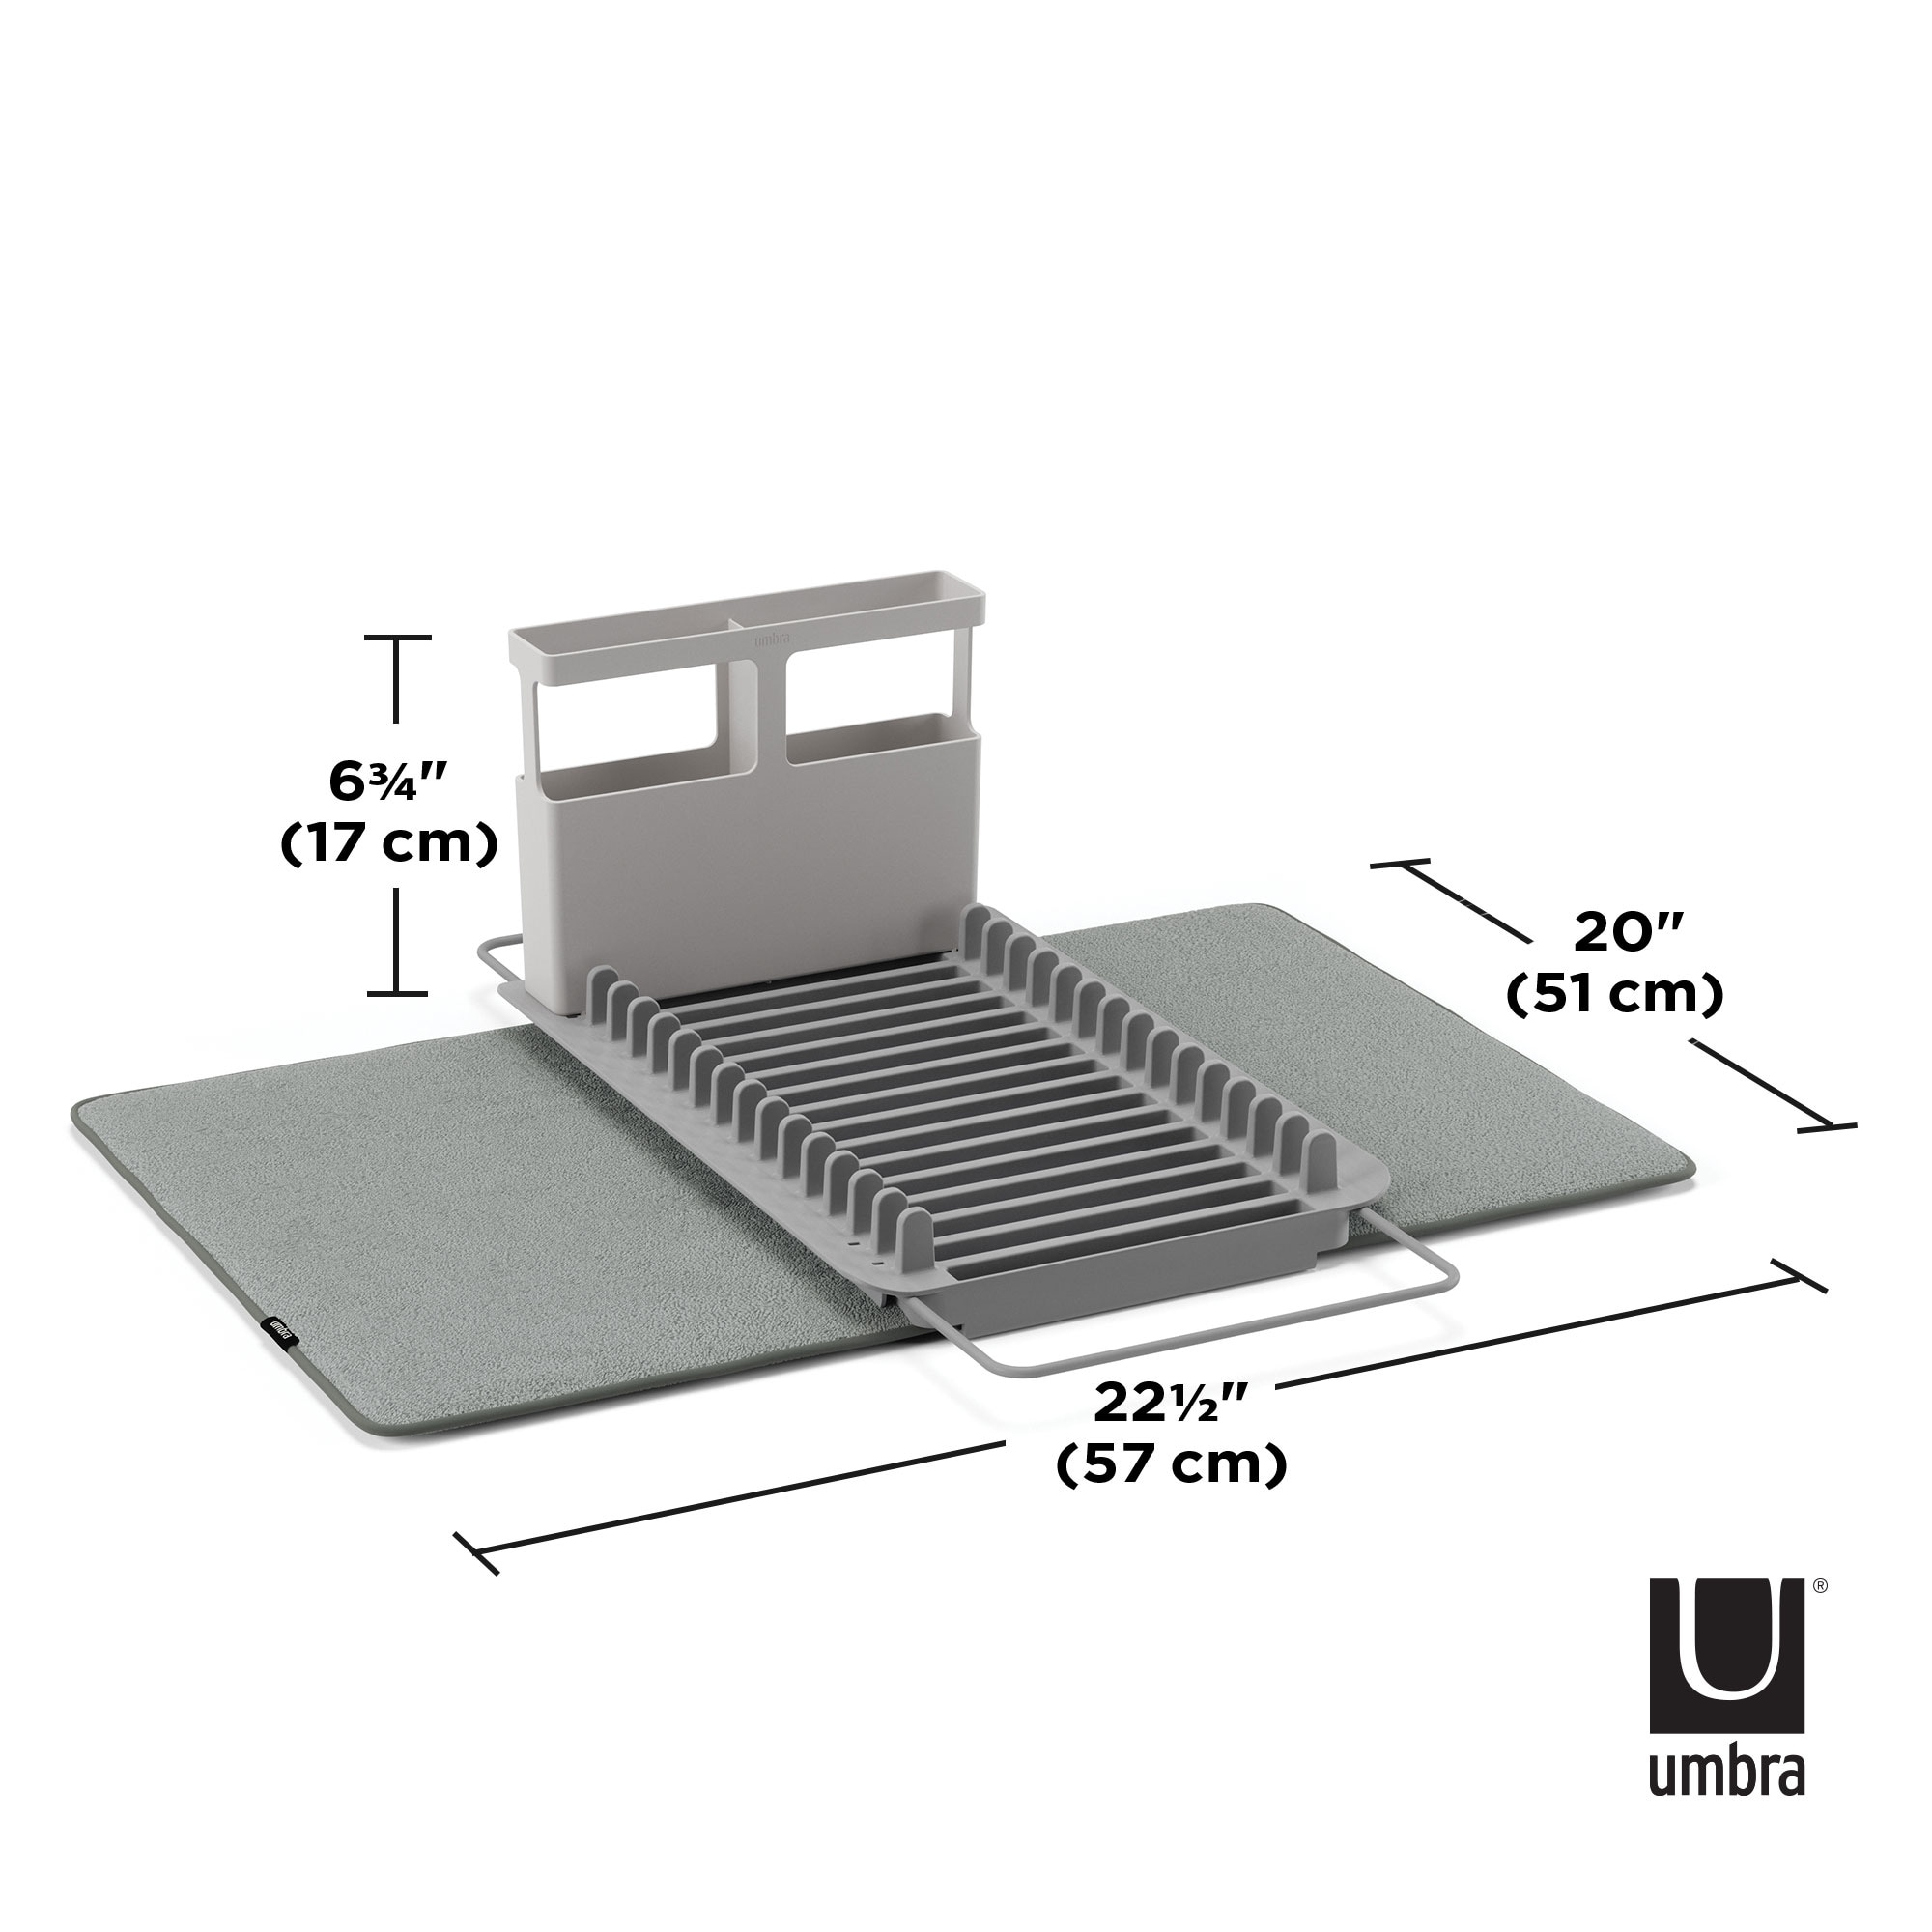 https://ak1.ostkcdn.com/images/products/is/images/direct/481e9eadfd5894f1d675be1ebff3a7fa4cf8b40d/Umbra-UDry-Over-the-Sink-Dish-Drying-Rack.jpg